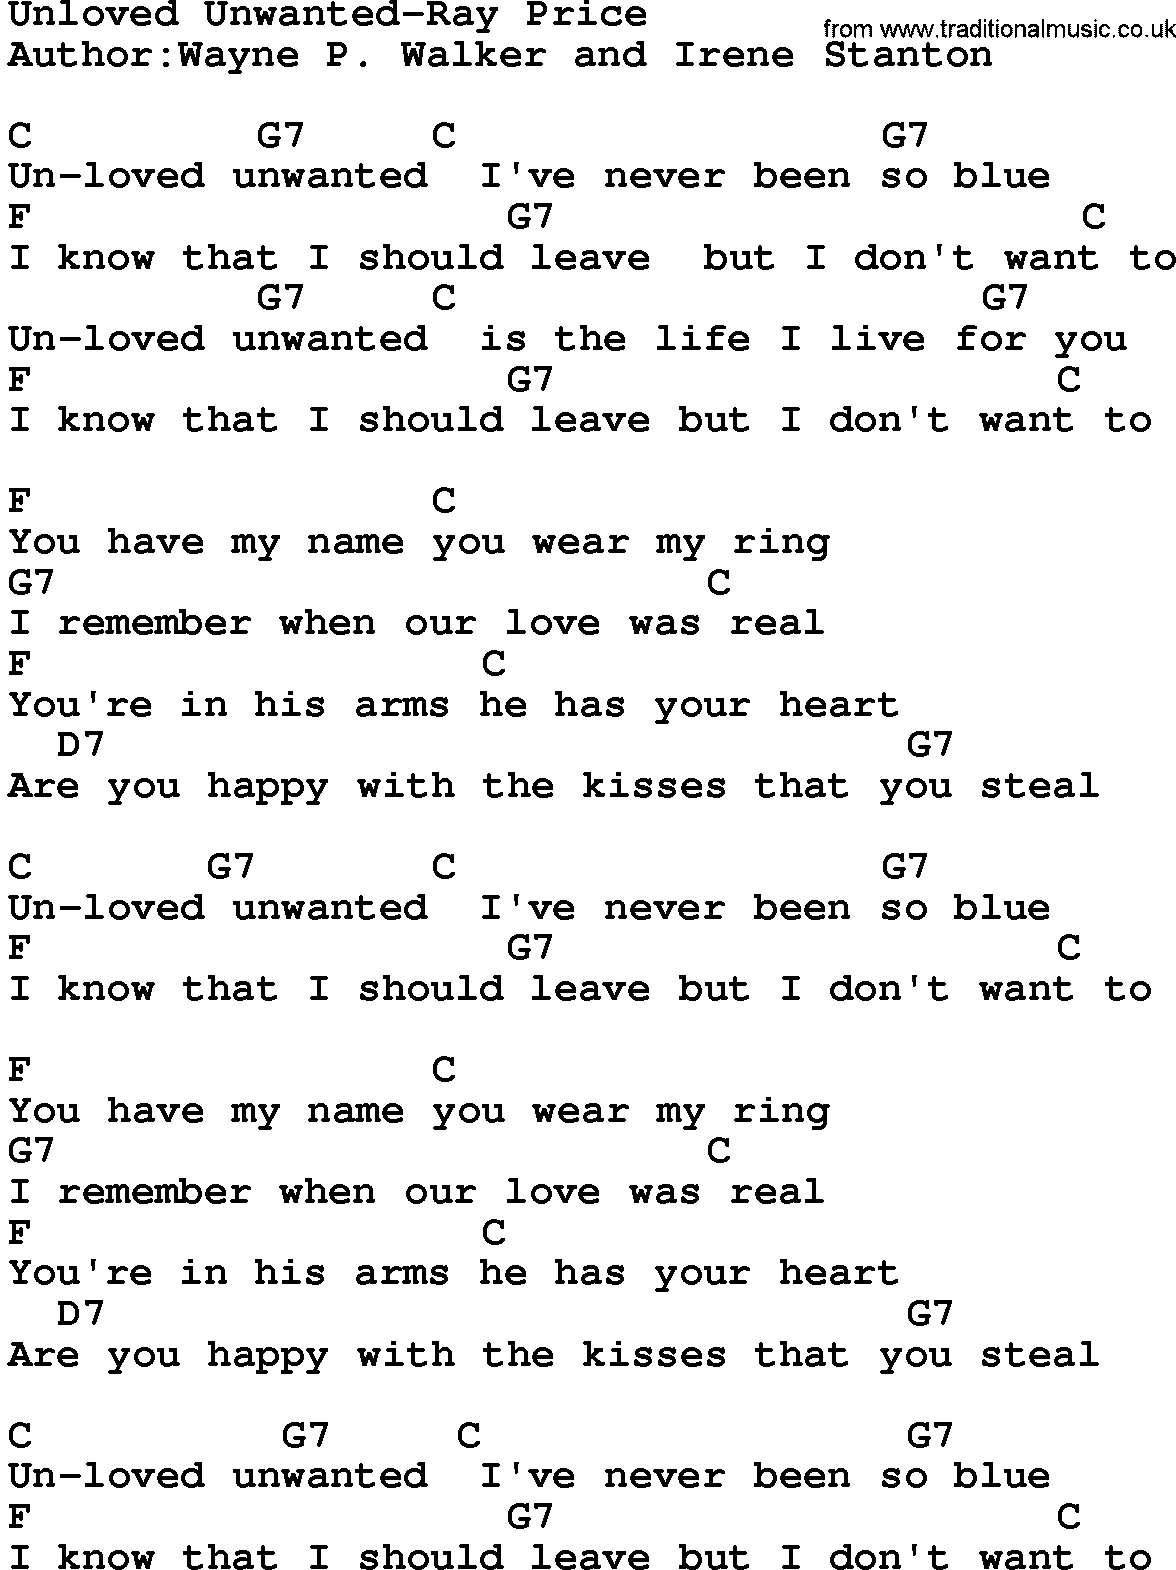 Country music song: Unloved Unwanted-Ray Price lyrics and chords